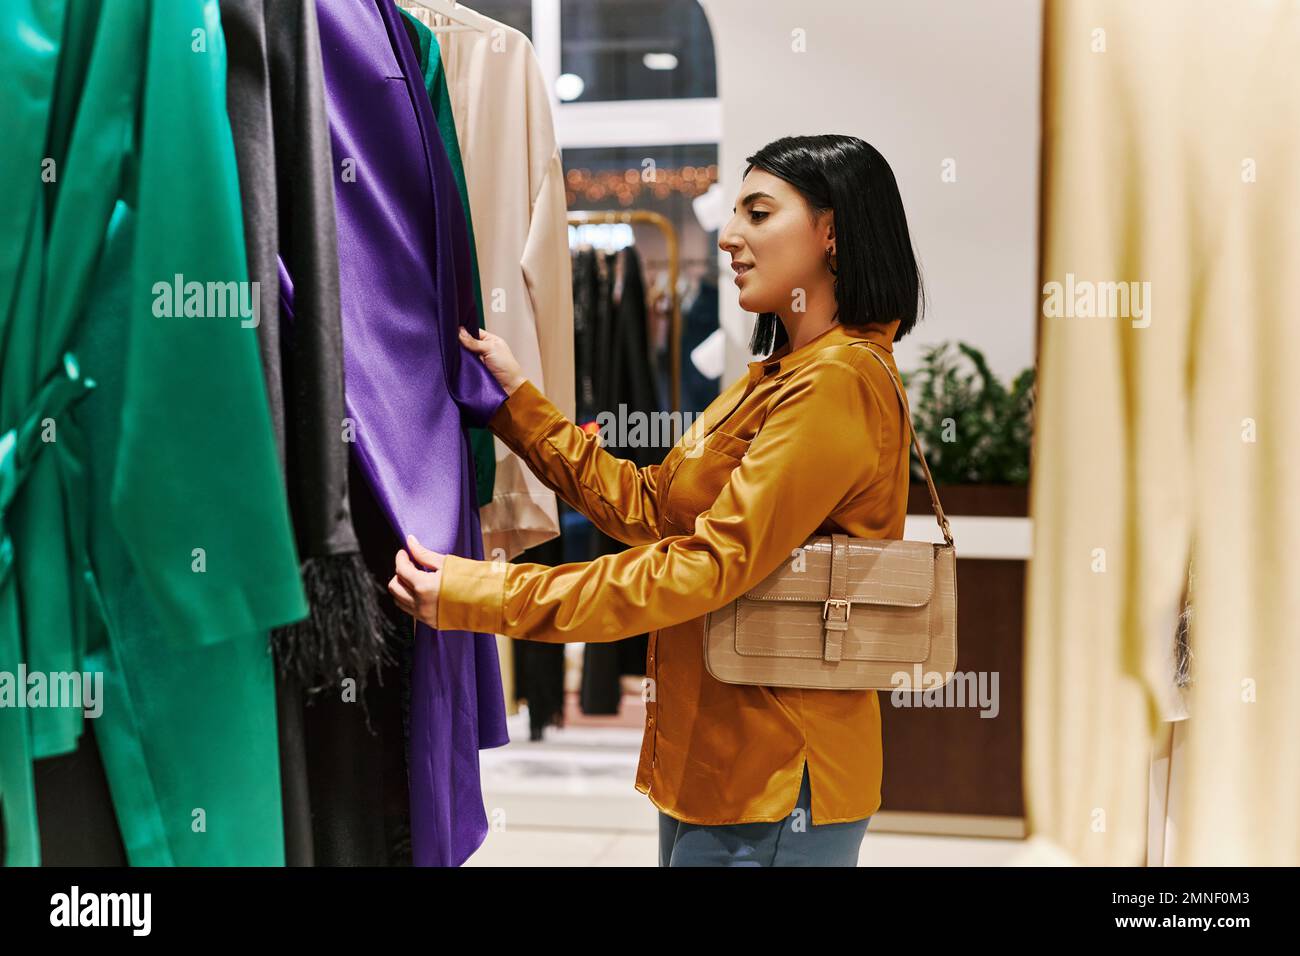 Side view portrait of smiling young woman browsing clothes on racks in luxury boutique and enjoying shopping Stock Photo